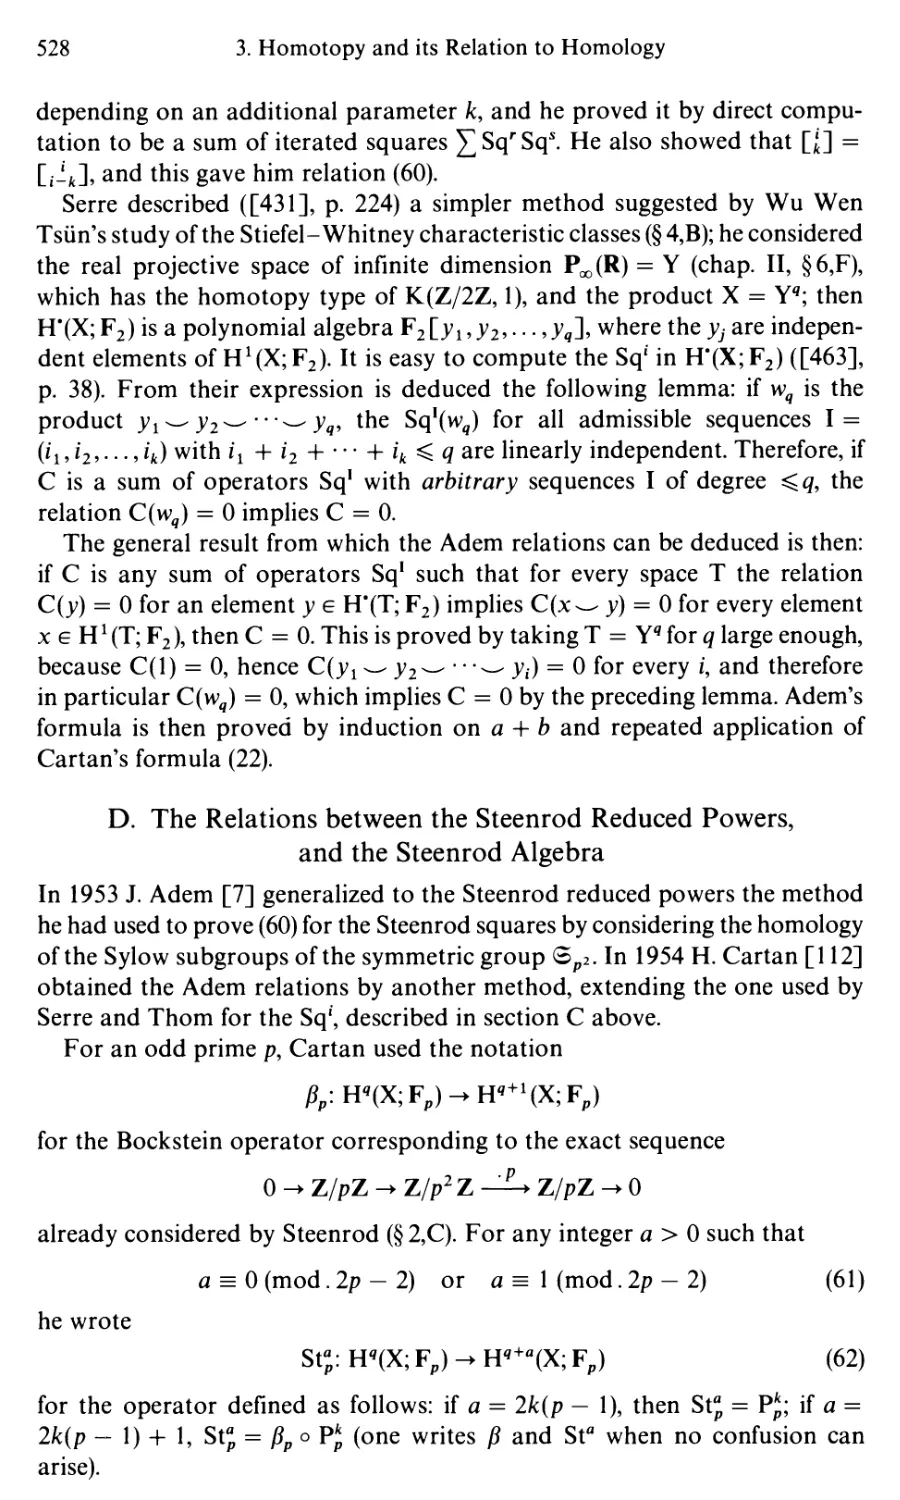 D. The Relations between the Steenrod Reduced Powers, and the Steenrod Algebra